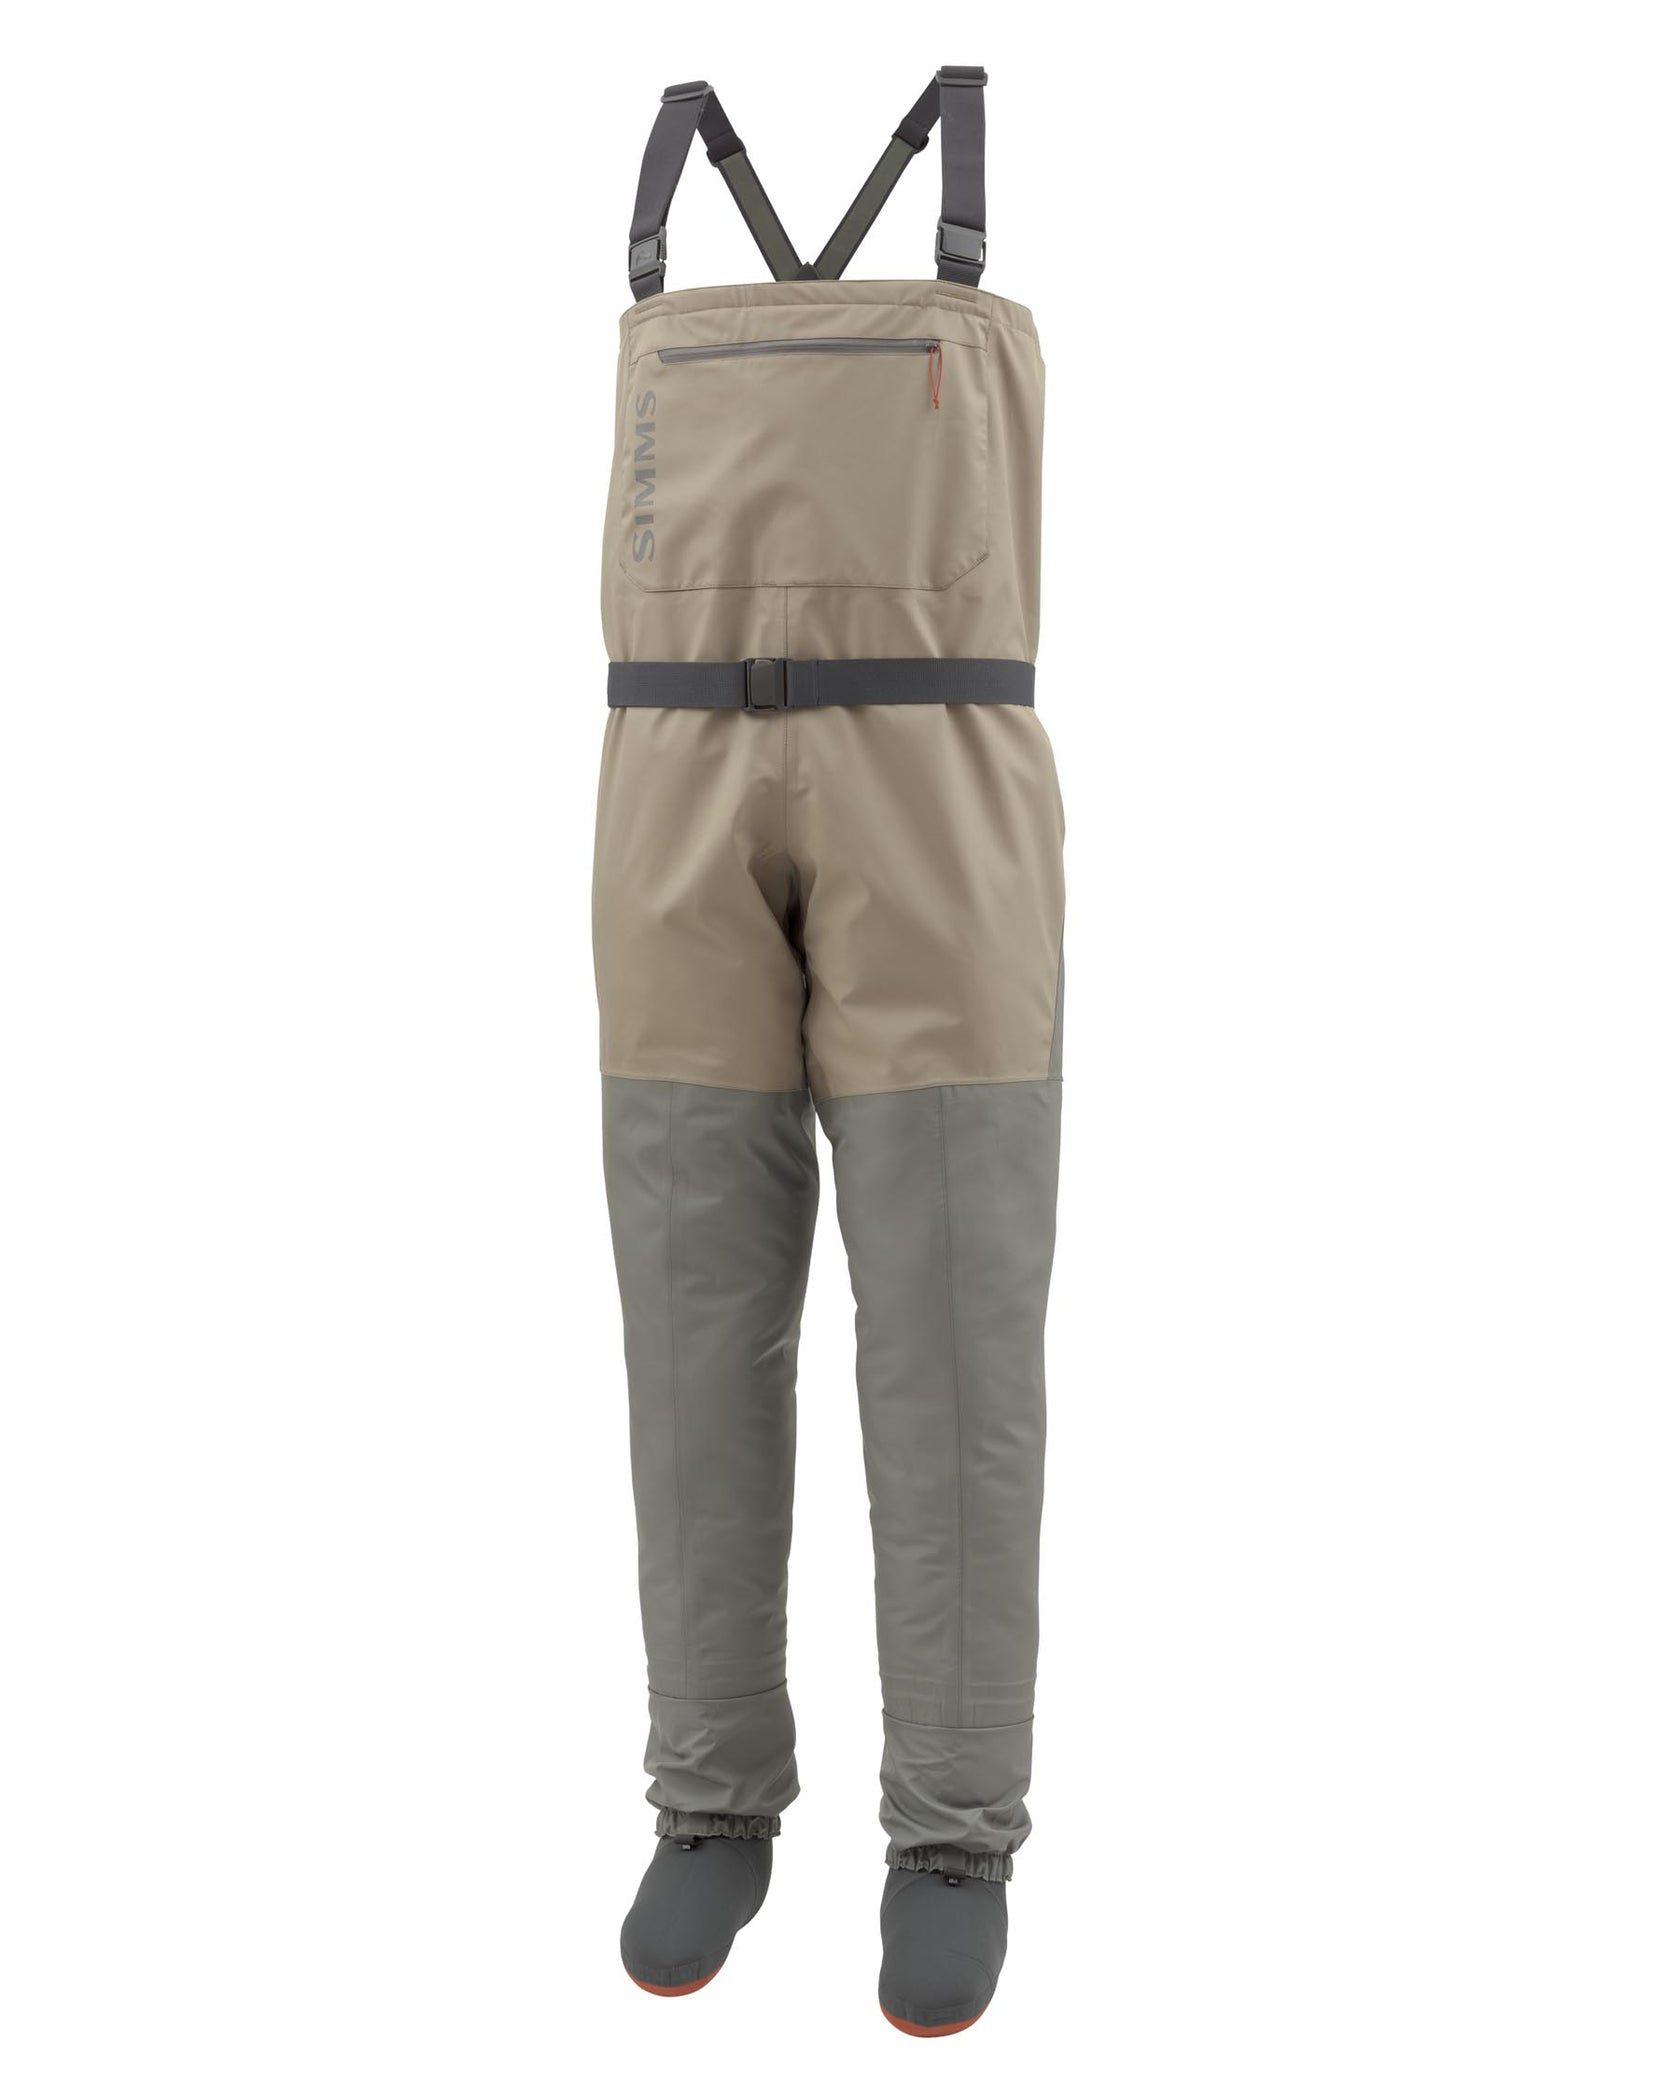 Simms M's Tributary Stockingfoot Wader - XX Large